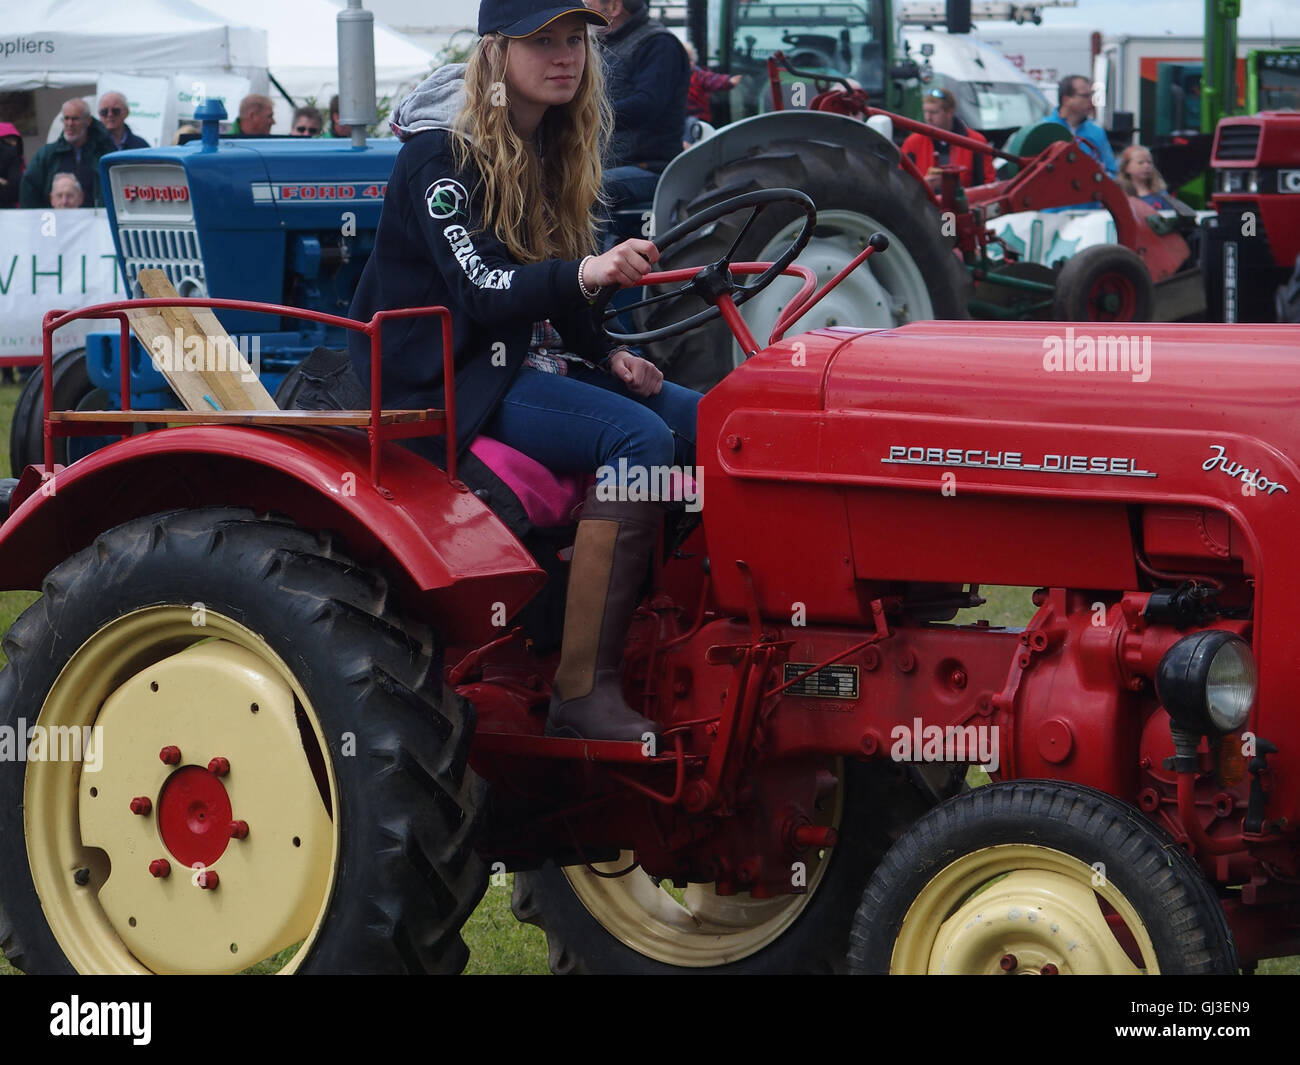 Vintage Tractor display, Main Ring, Haddington Show, East Fortune, East Lothian Stock Photo